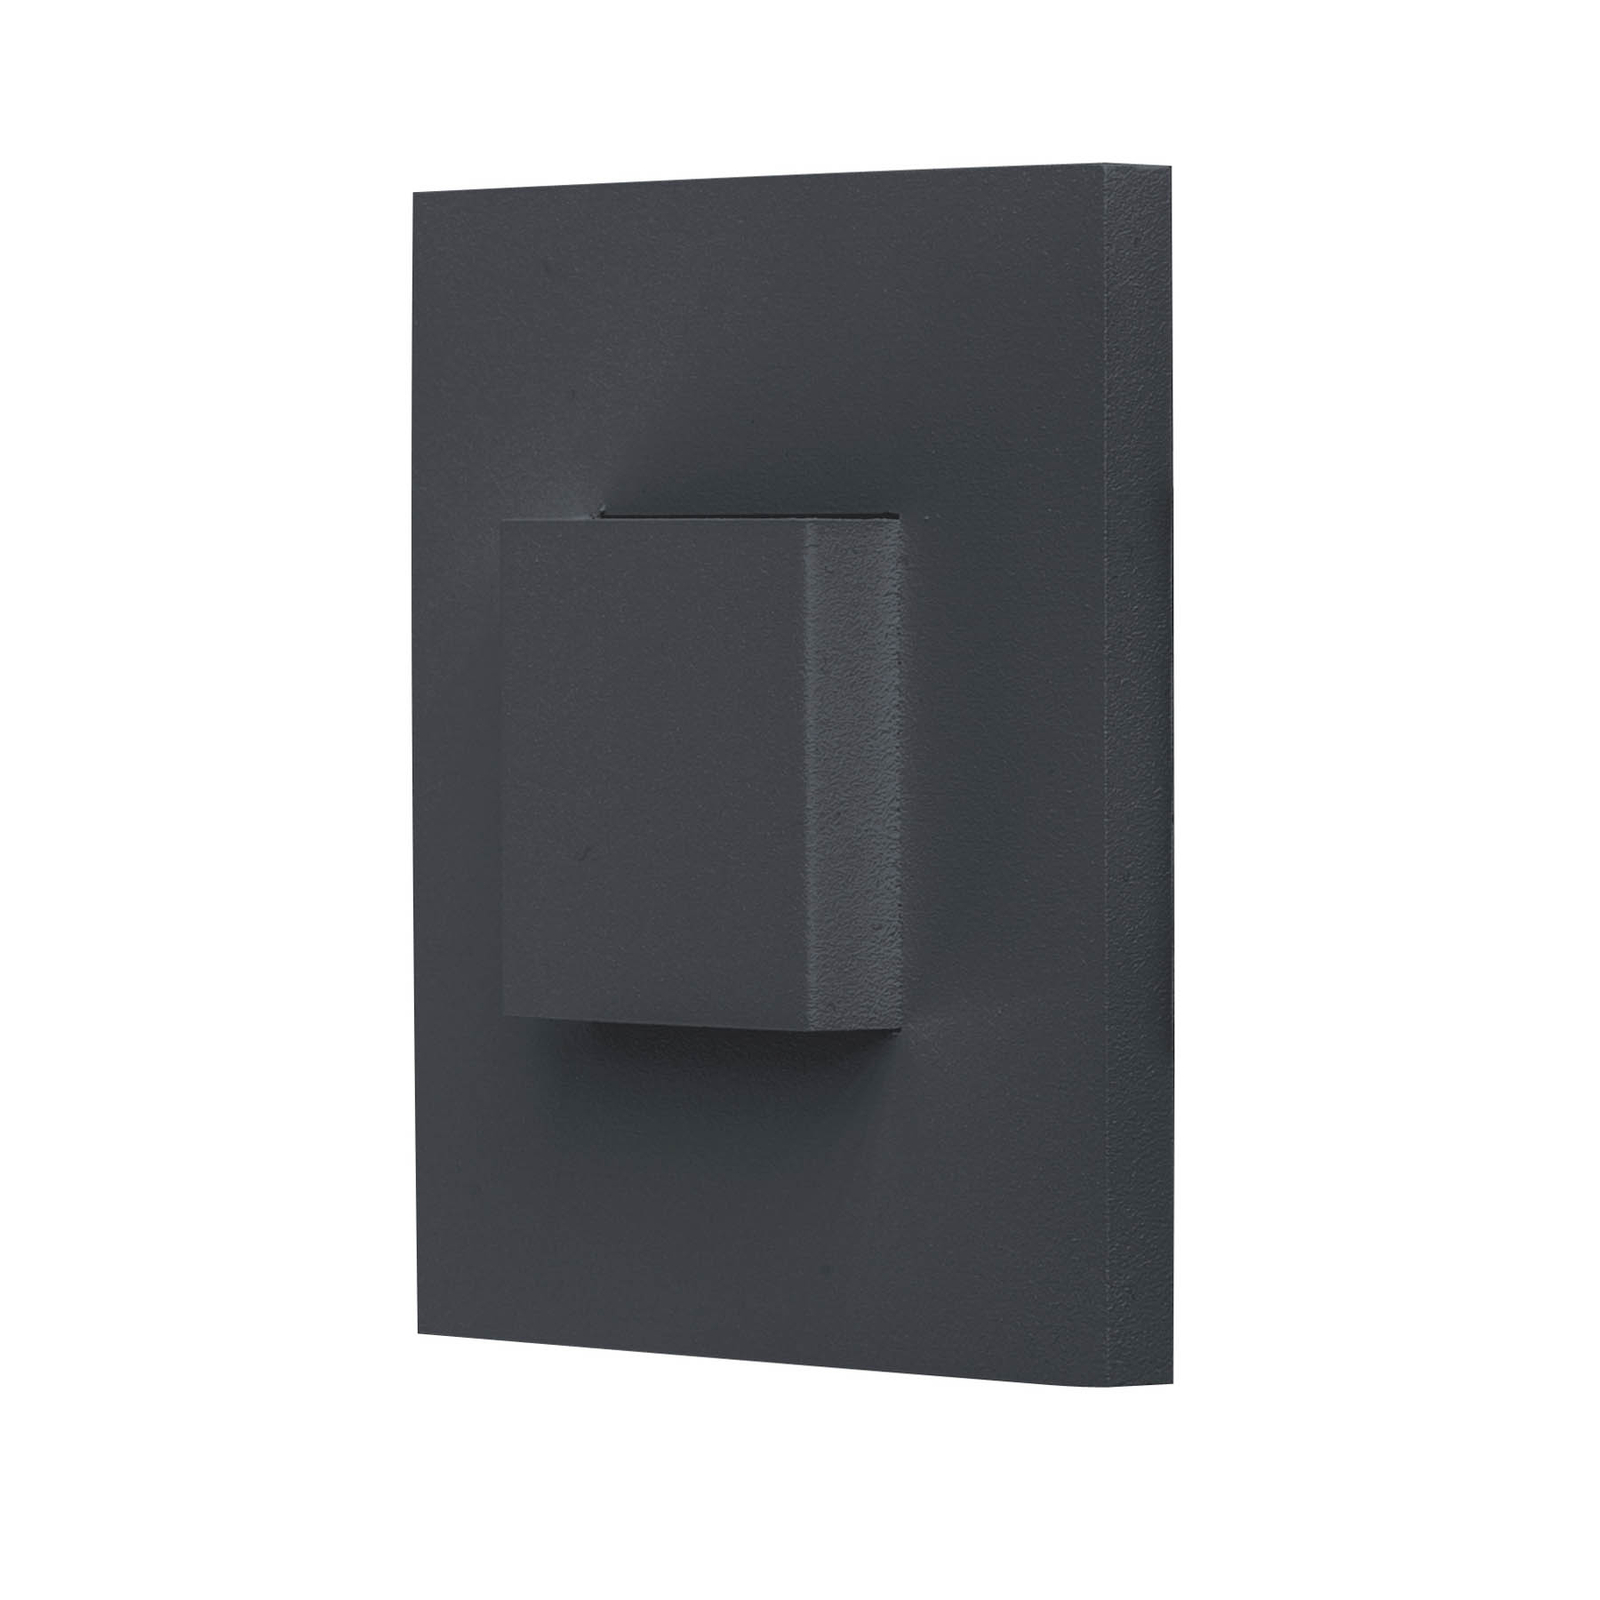 EVN LQ230 recessed wall light up/down anthracite